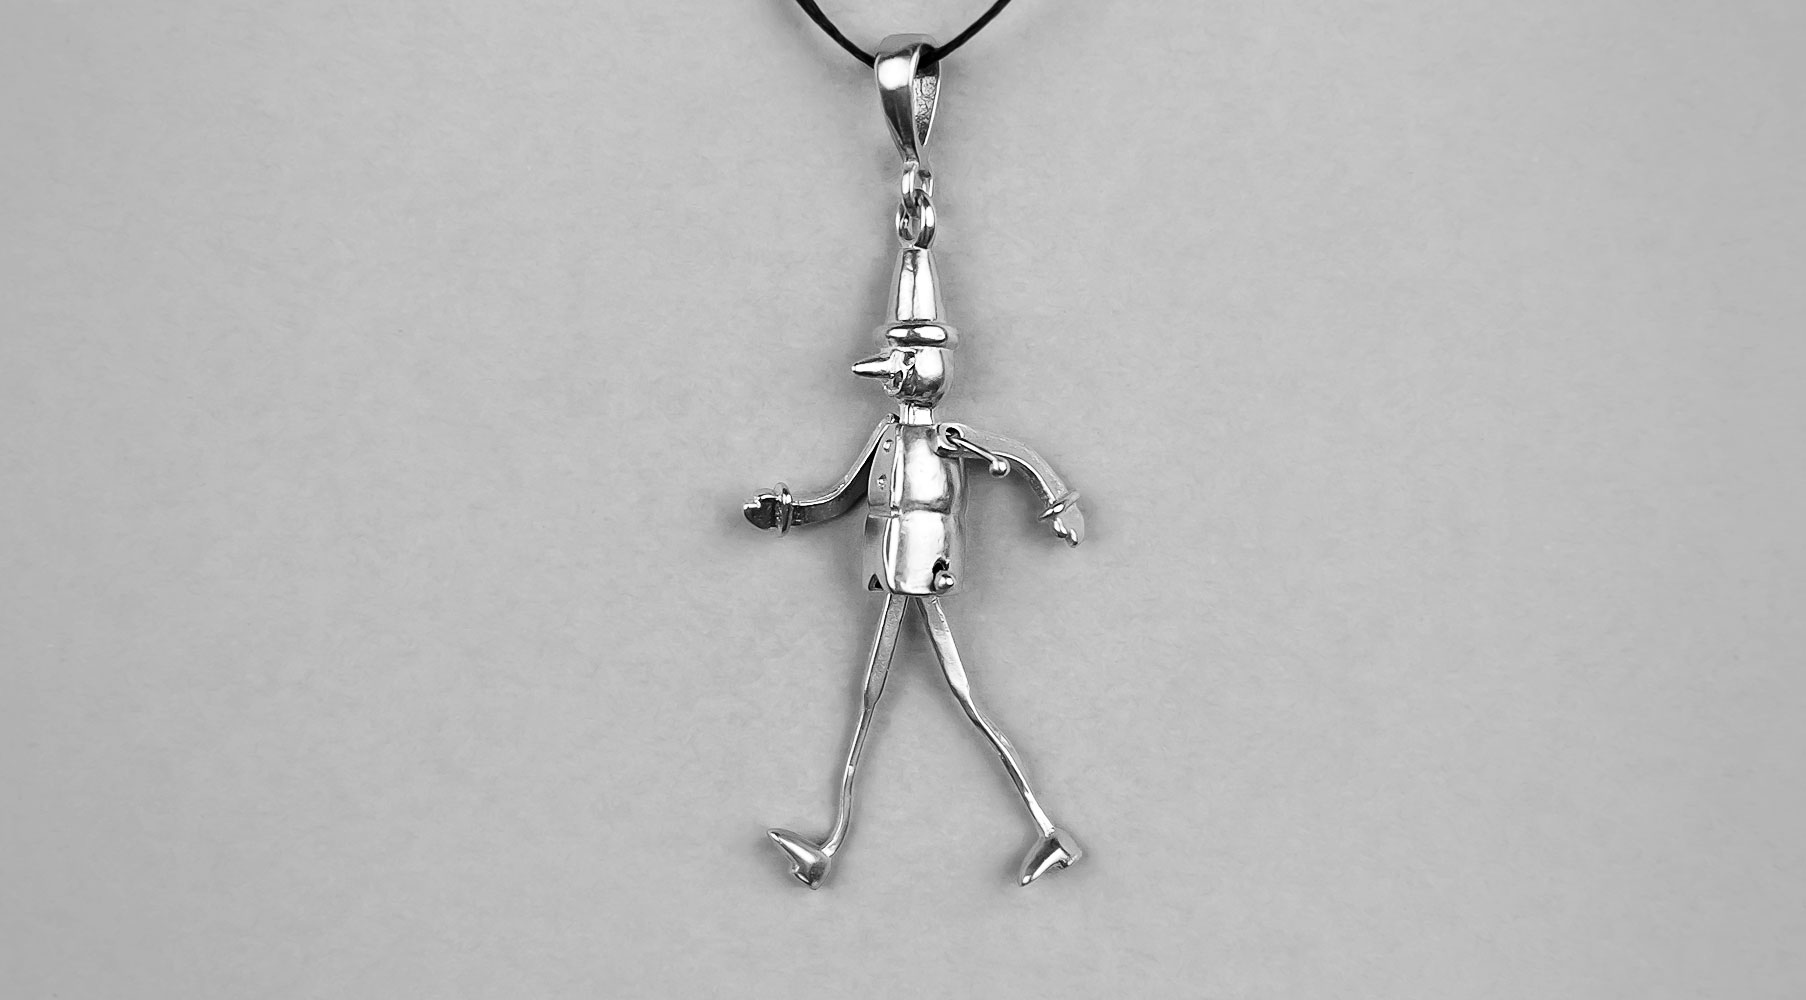 pinocchio, talisman, good luck, charm, pendant, solid brass, gold plated, adrimar, firenze, florence, made in italy, italia, italy, tuscany, toscana